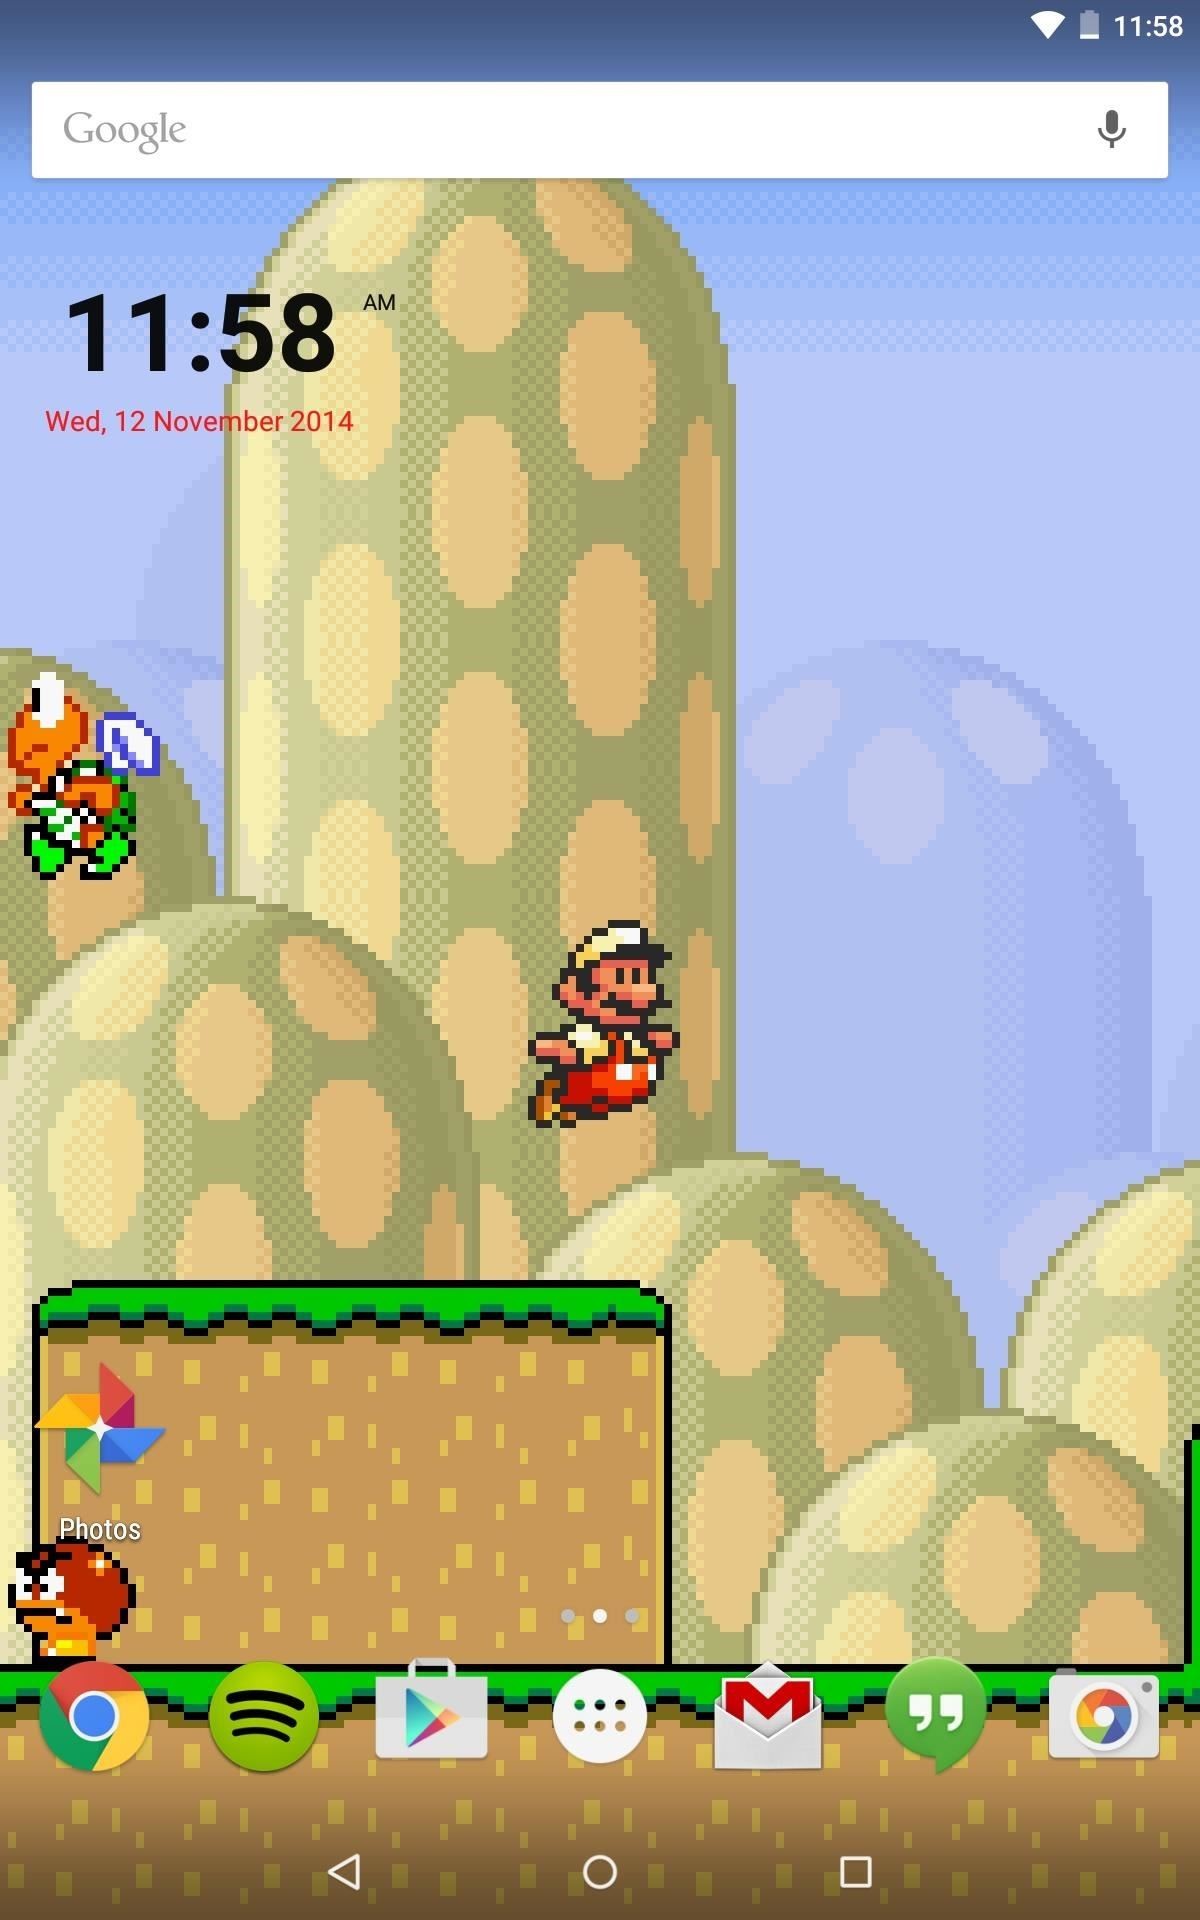 1200x1920 While this live wallpaper would be much cooler if it were actually  playable, it's still much better than staring at static image of Mario.